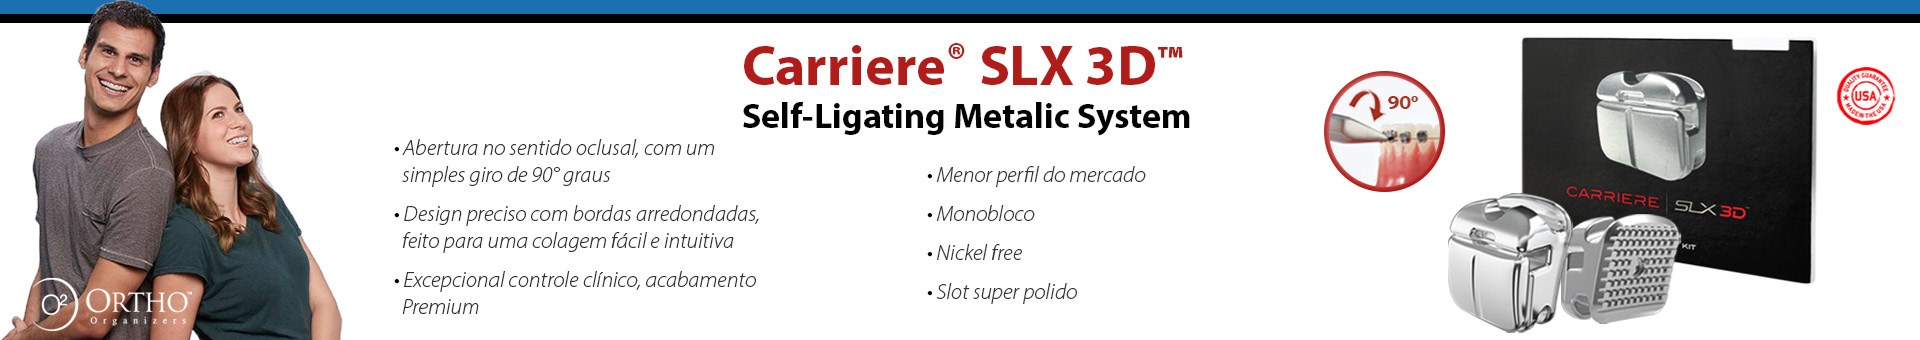 Banner Carriere SLX 3D Metálico